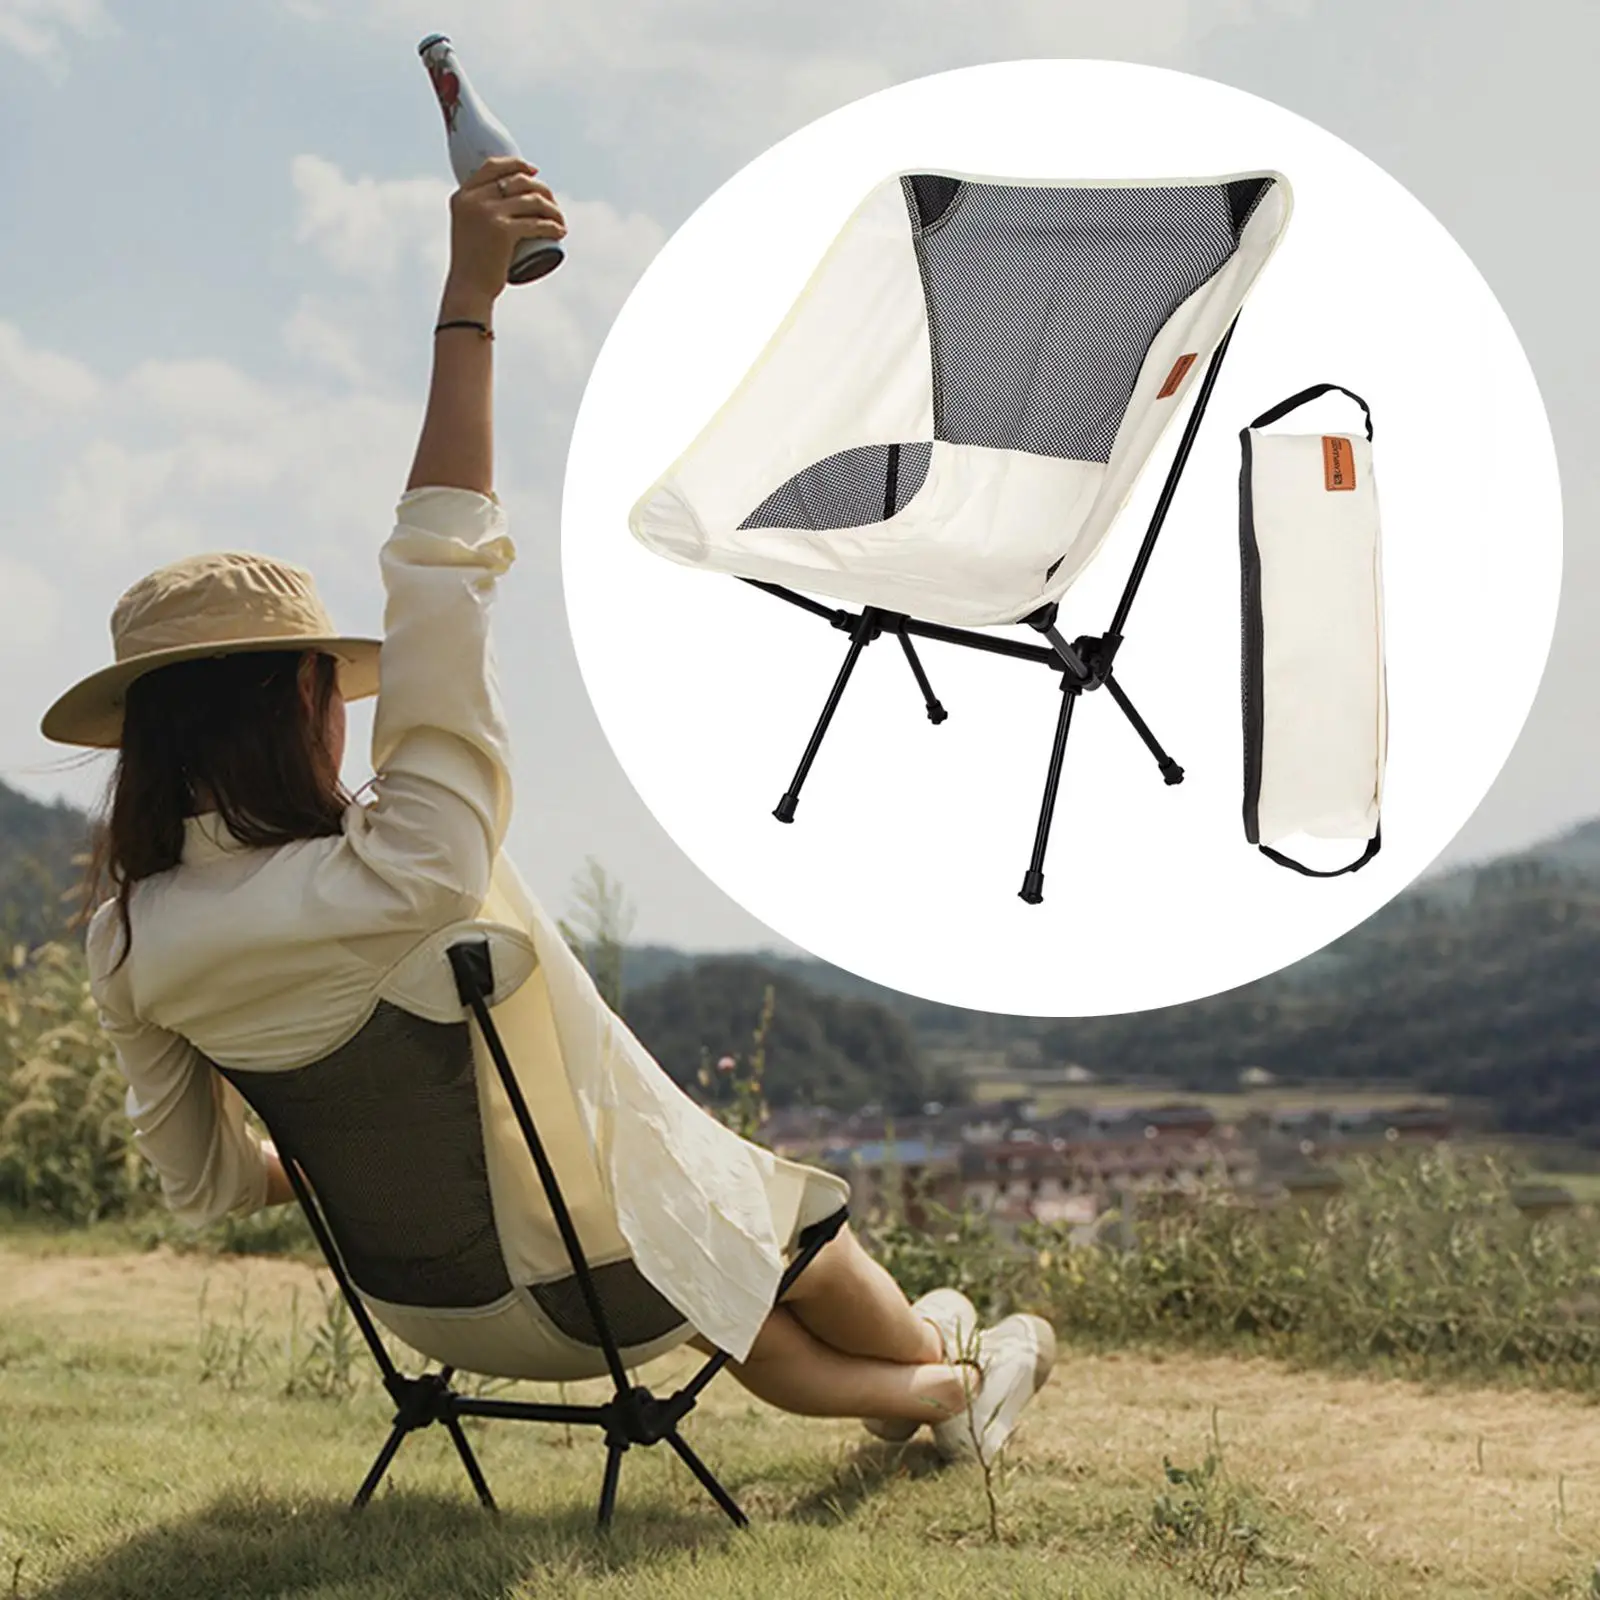 Foldable Moon Chair Portable Compact Furniture for Outdoor Hiking Camping